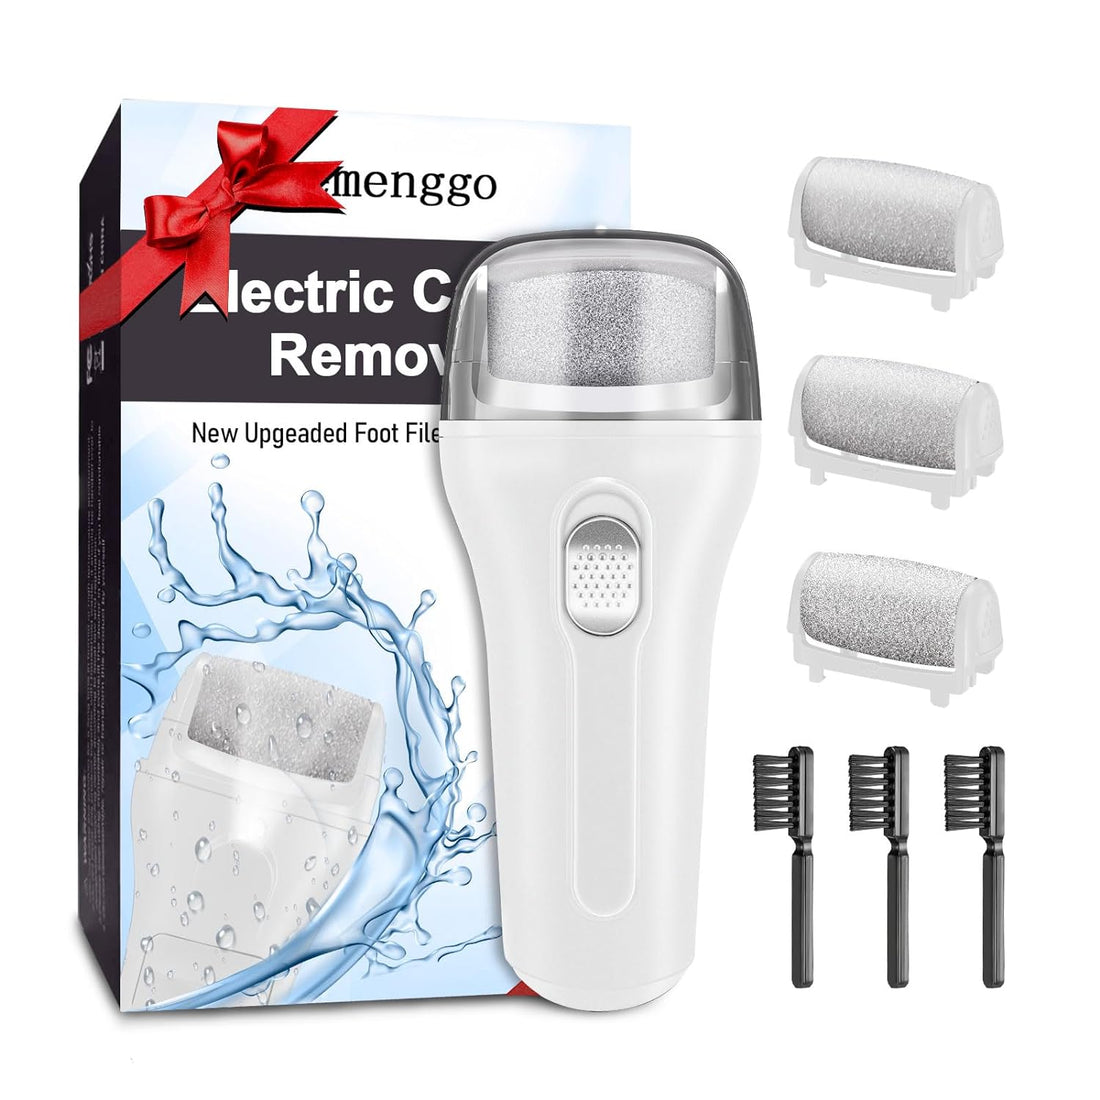 Foot Callus Remover Electric Callus Remover for Feet,Electric Foot Scrubber Dead Skin Remover,Professional Pedi Feet Care Perfect with 3 Rollers&2 Speed for Dead,Hard Cracked Dry Skin Ideal Gift(White